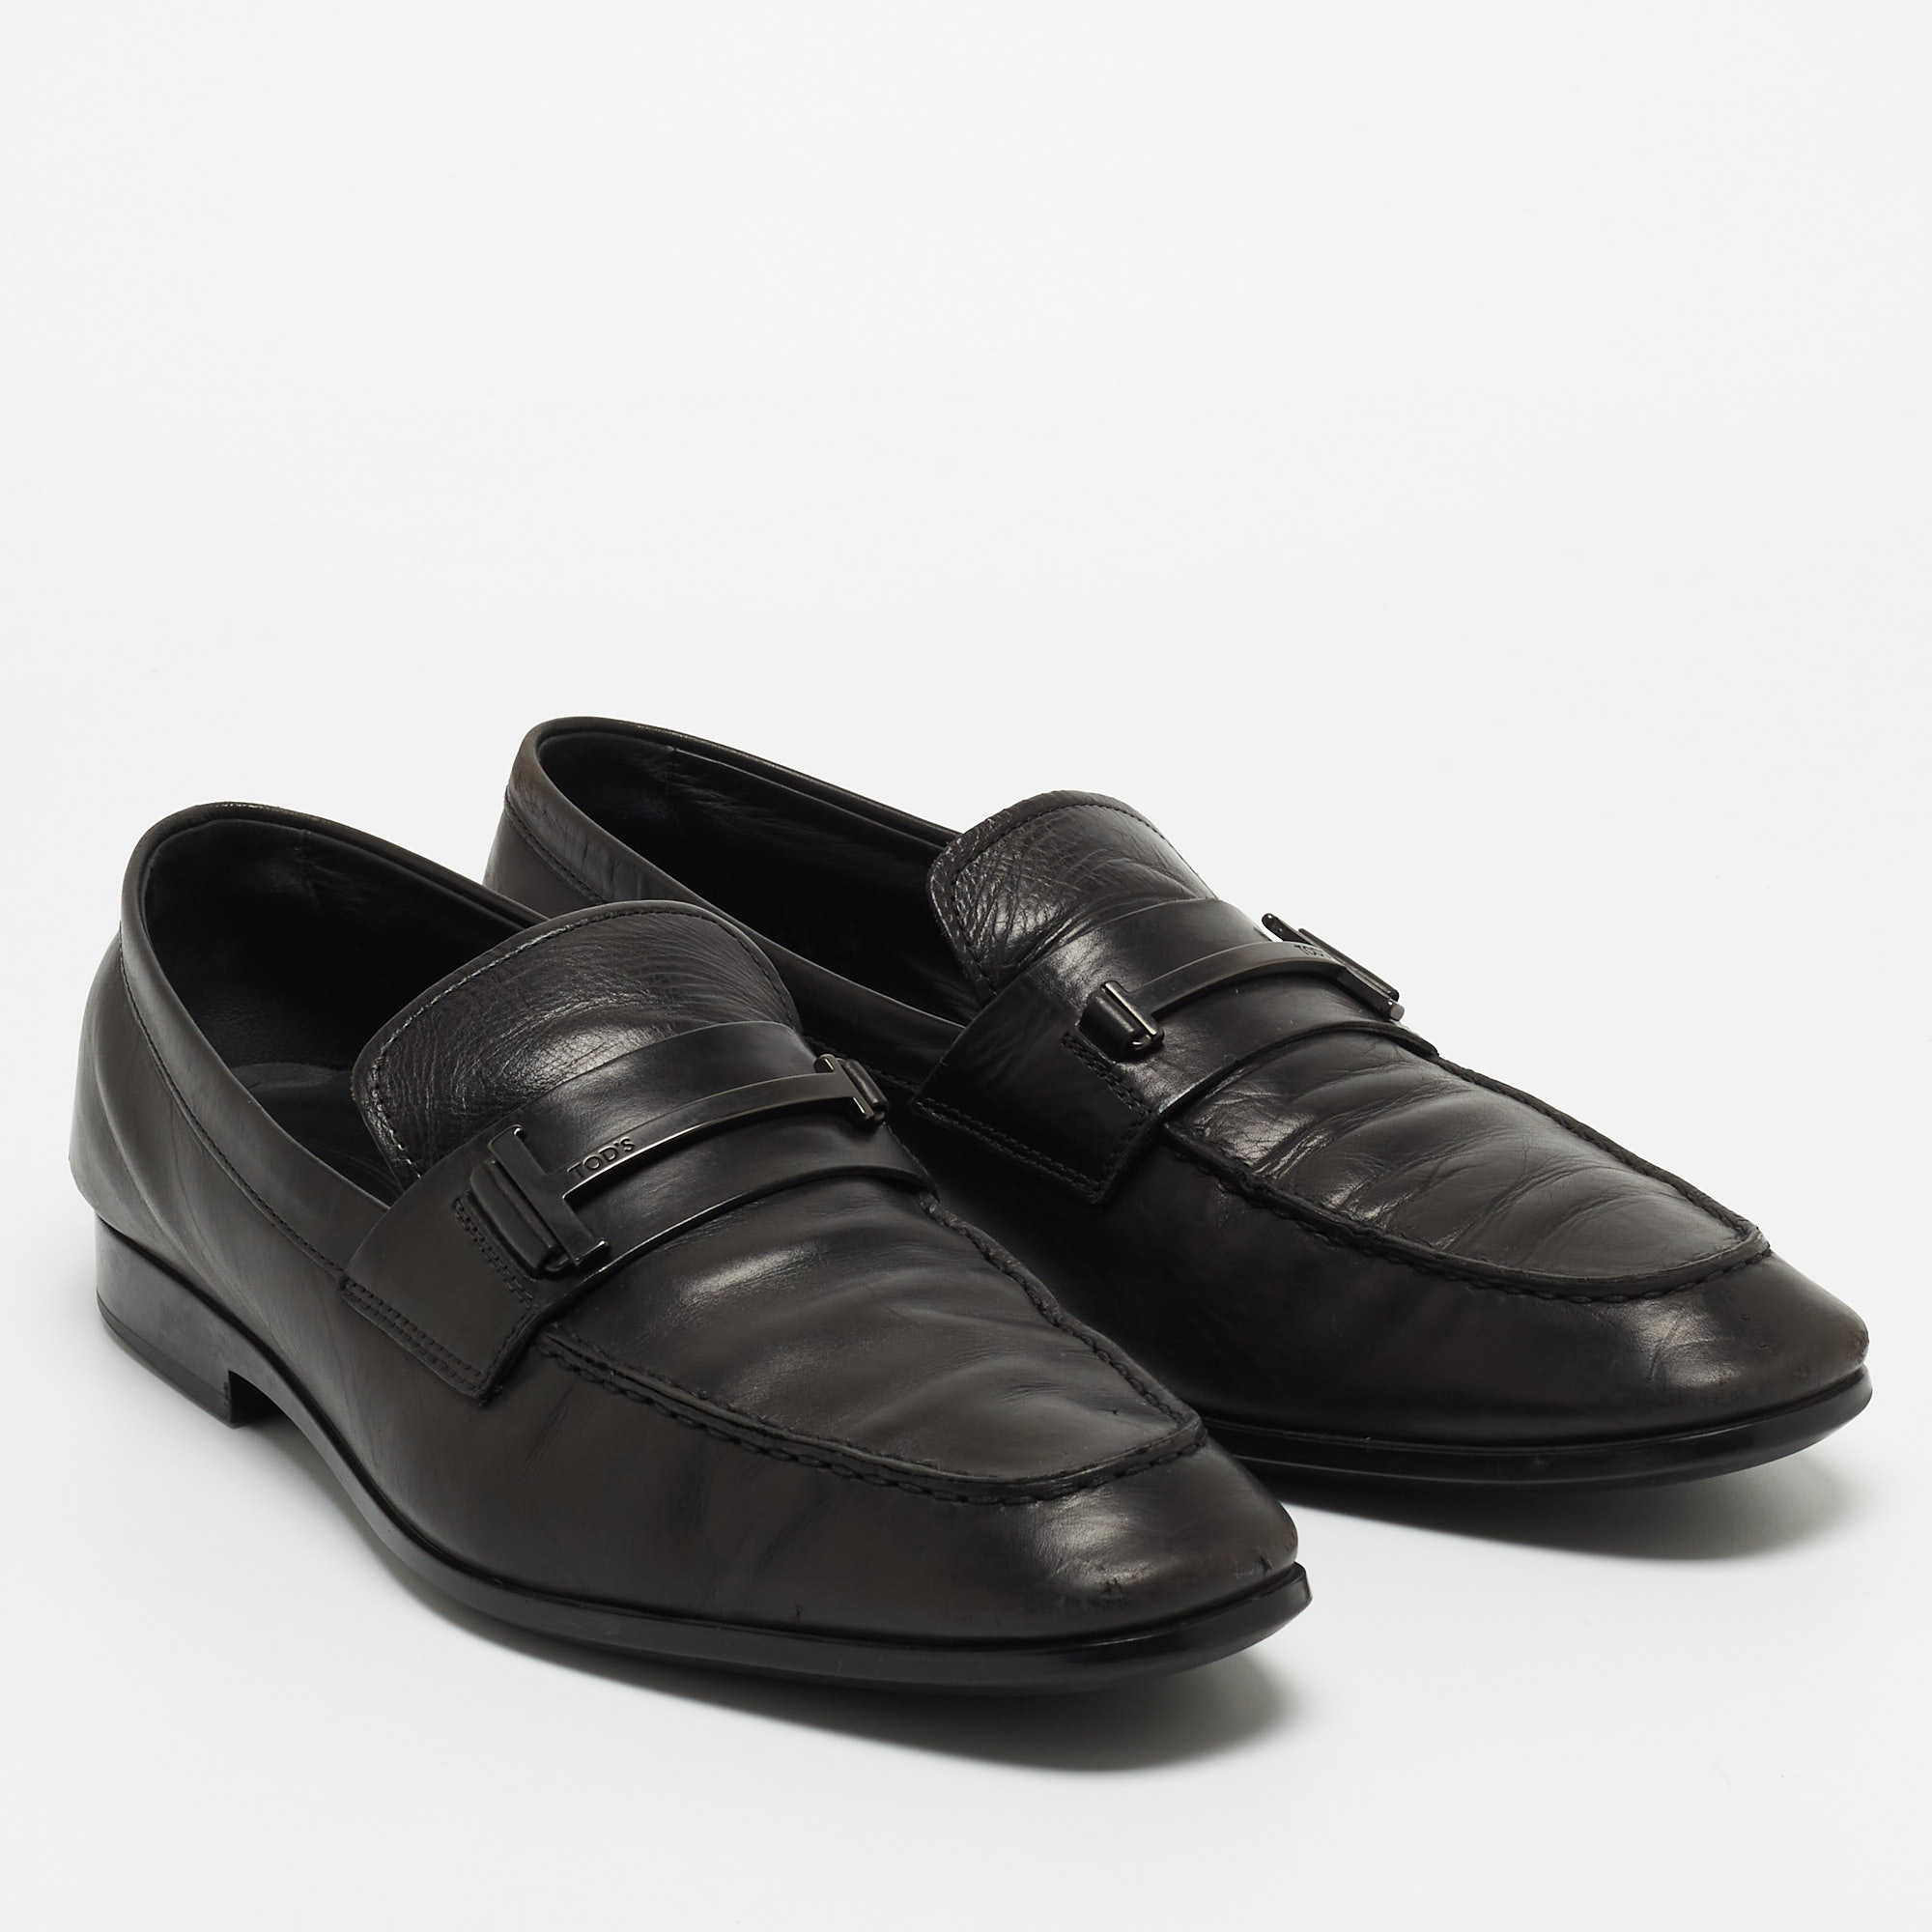 Tod's Black Leather Double T Slip On Loafers Size 43